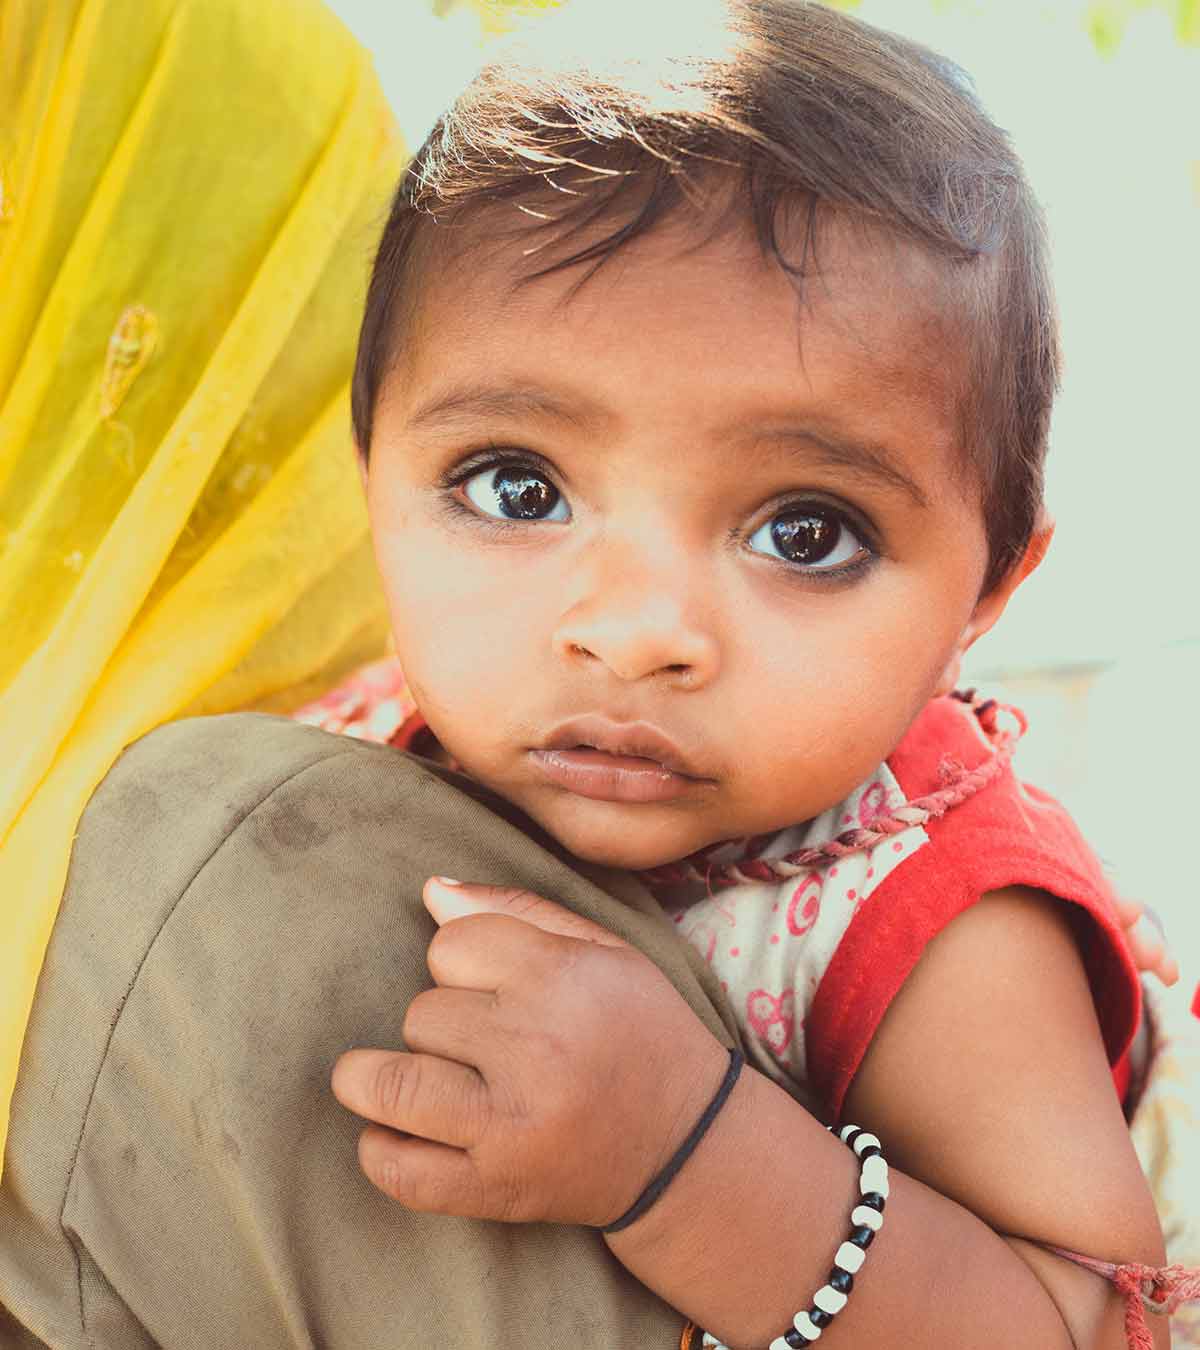 Is It Safe To Apply Surma Or Kajal To My Newborn's Eyes?